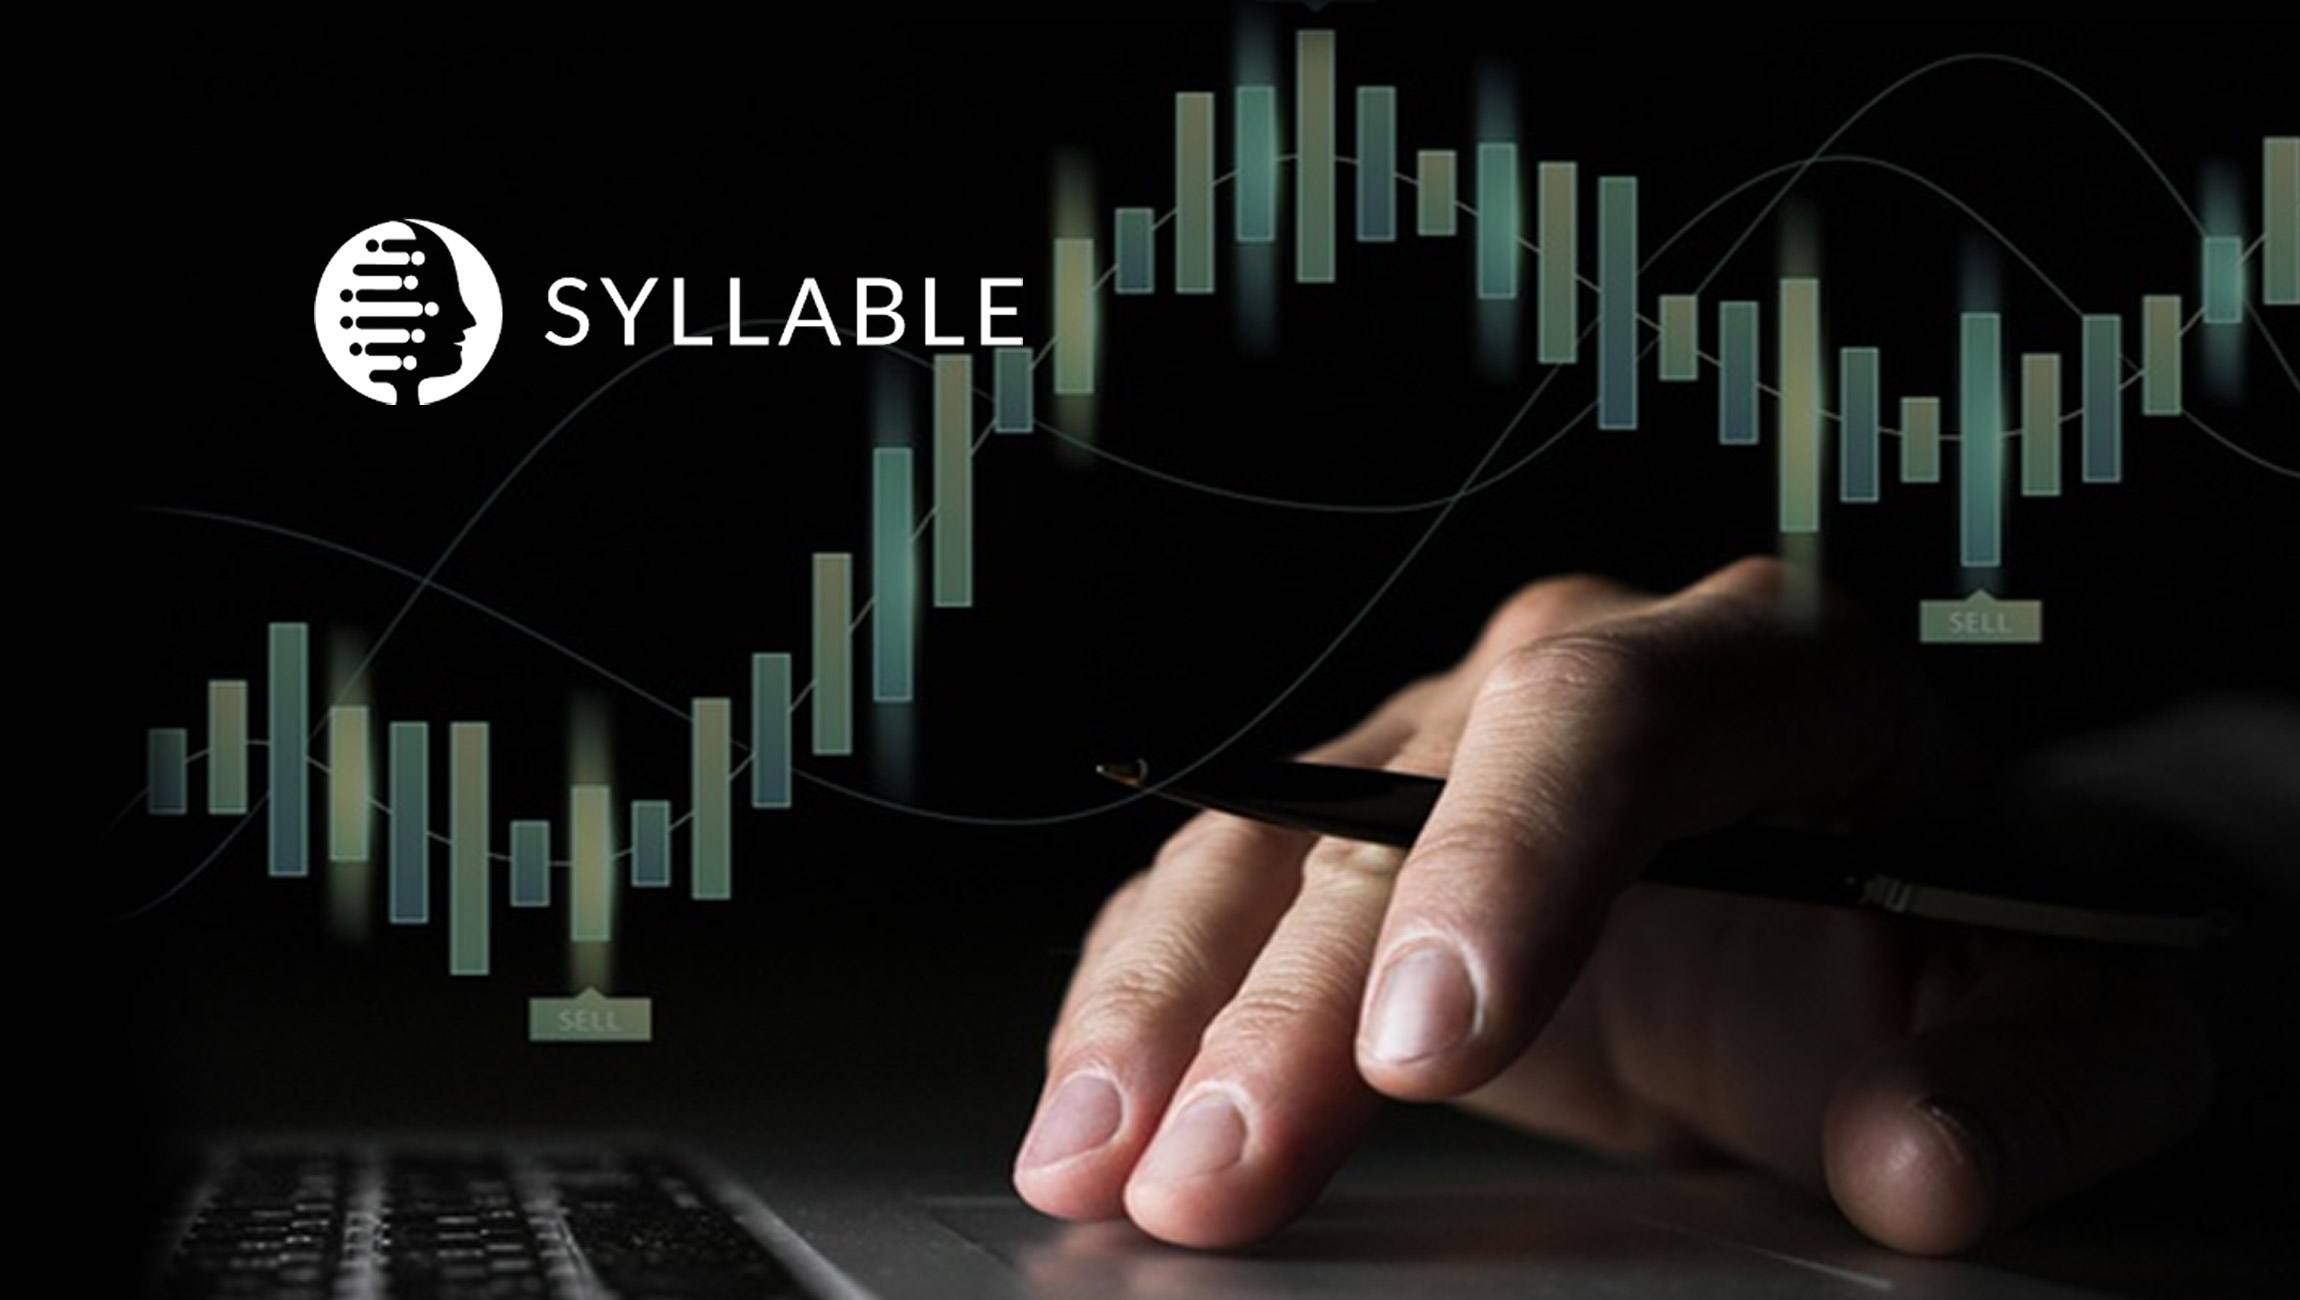 Syllable Raises $28 Million Led by Oak HC/FT to Transform Customer Service in Healthcare